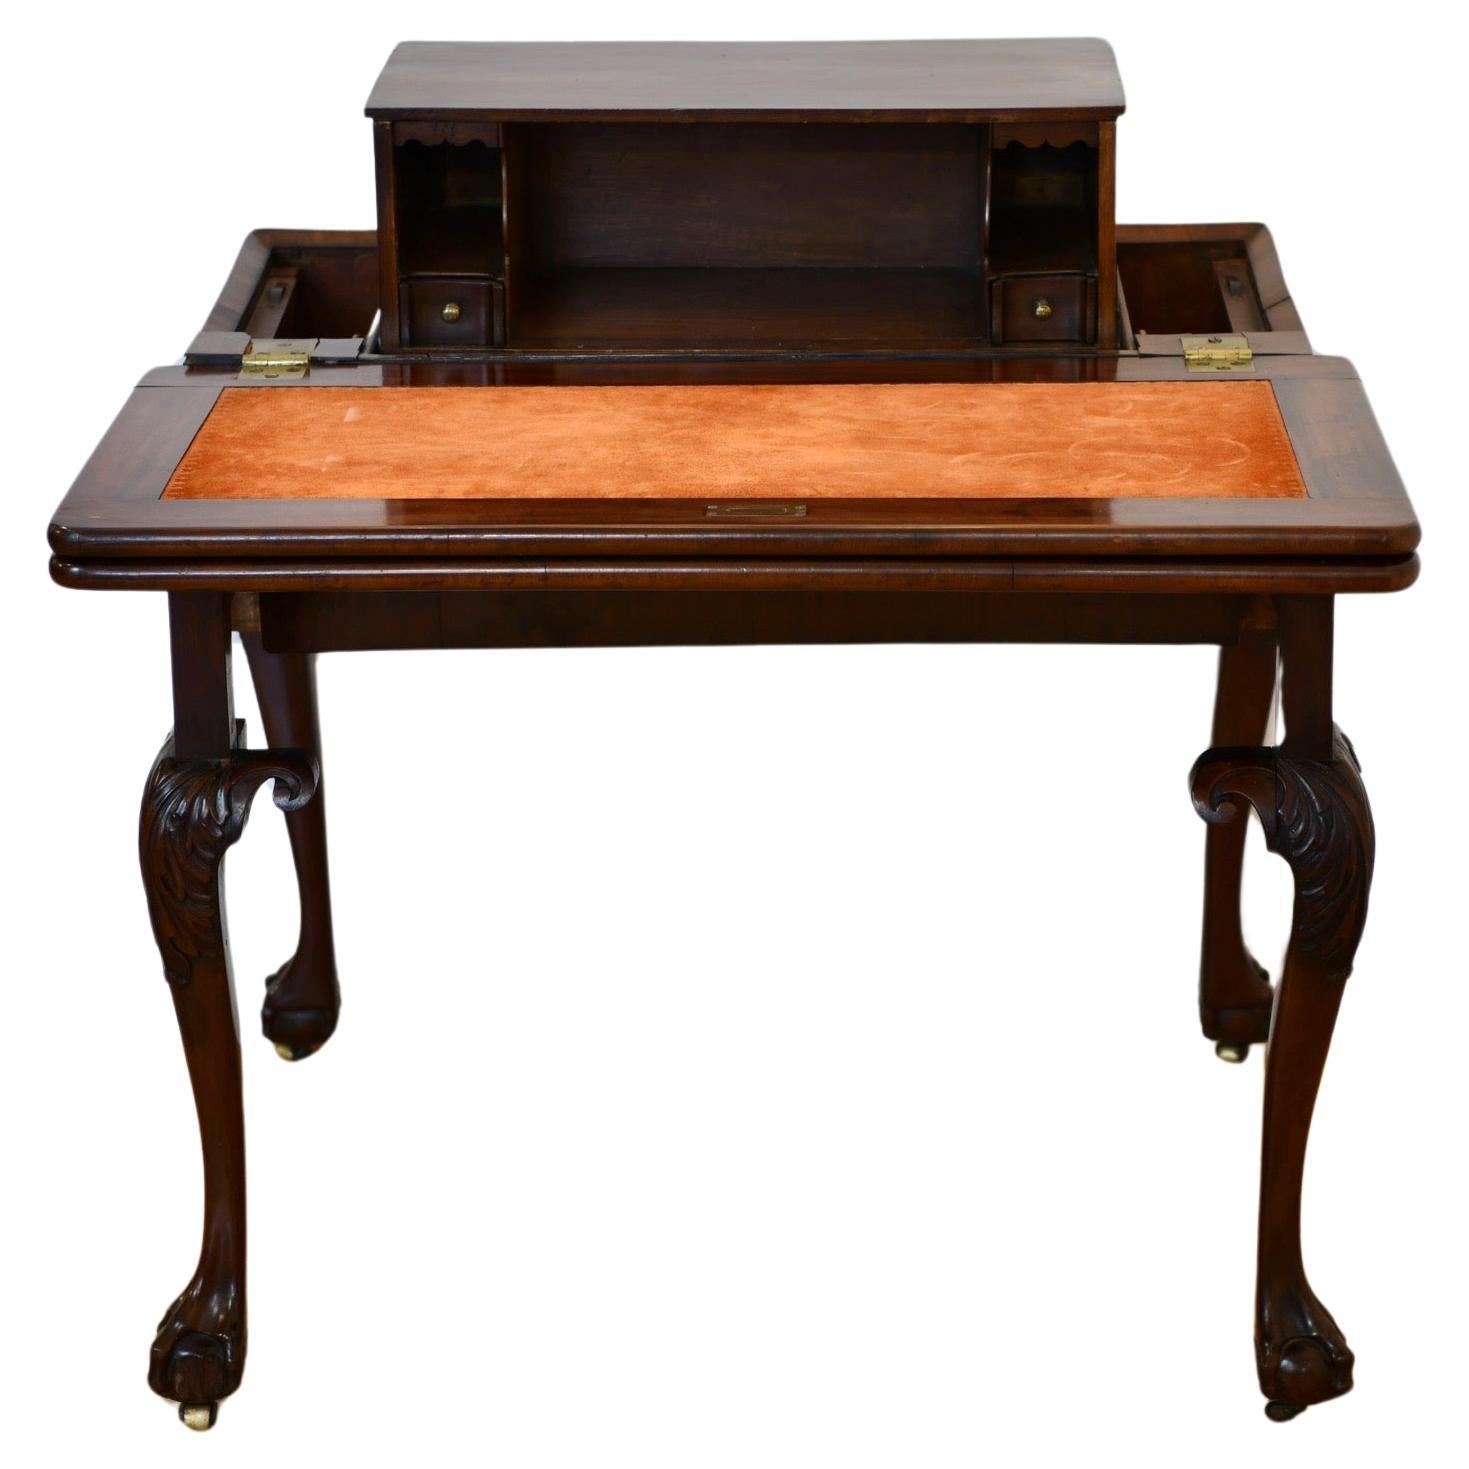 Georgian Revival Transforming Desk and Games Table For Sale